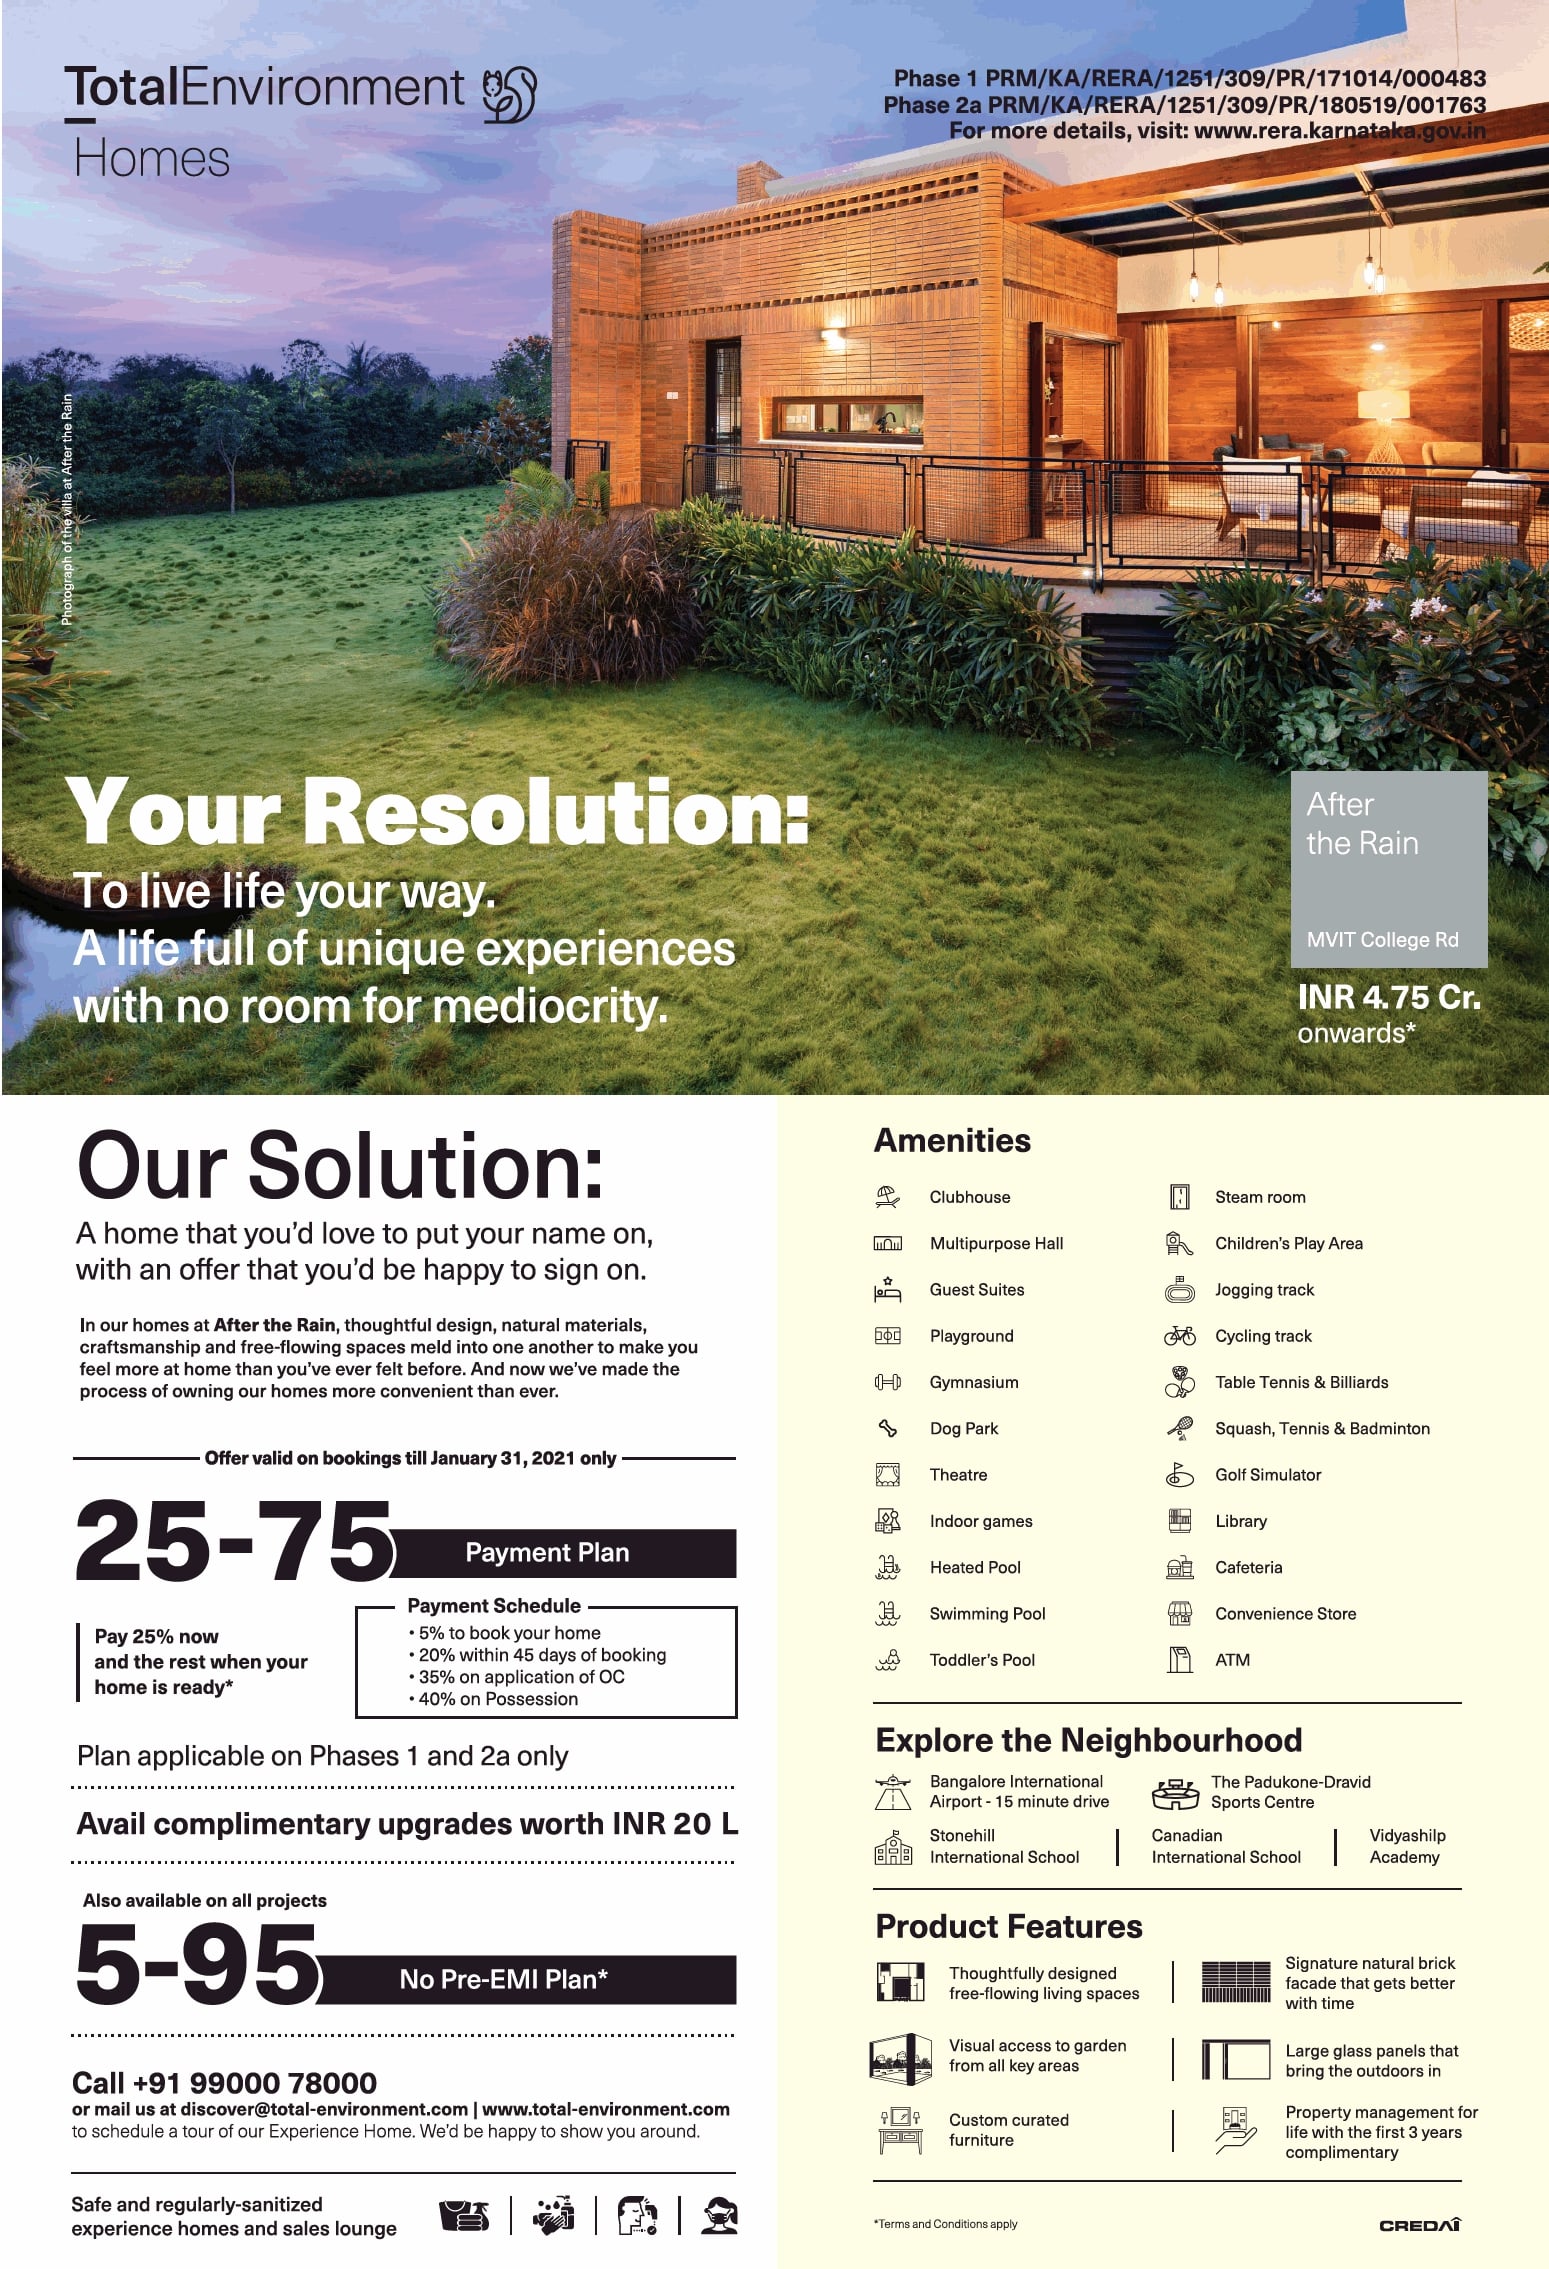 totalenvironmental-homes-your-resolution-to-live-life-your-way-ad-times-of-india-bangalore-08-01-2021